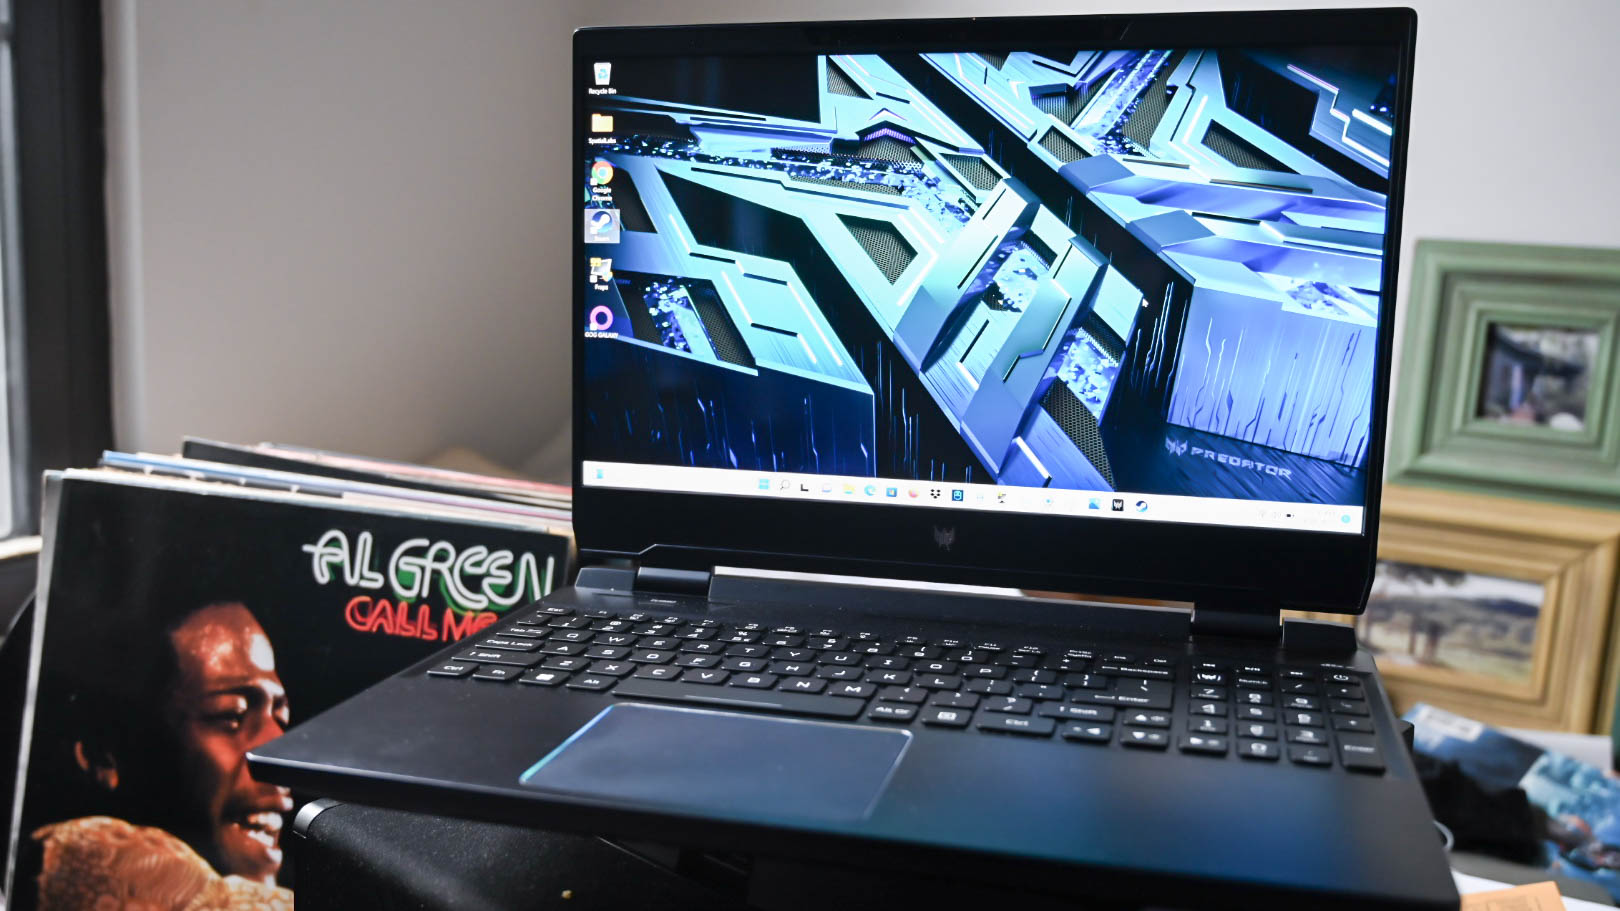 Acer Predator Helios 300 SpatialLabs Edition hands-on review